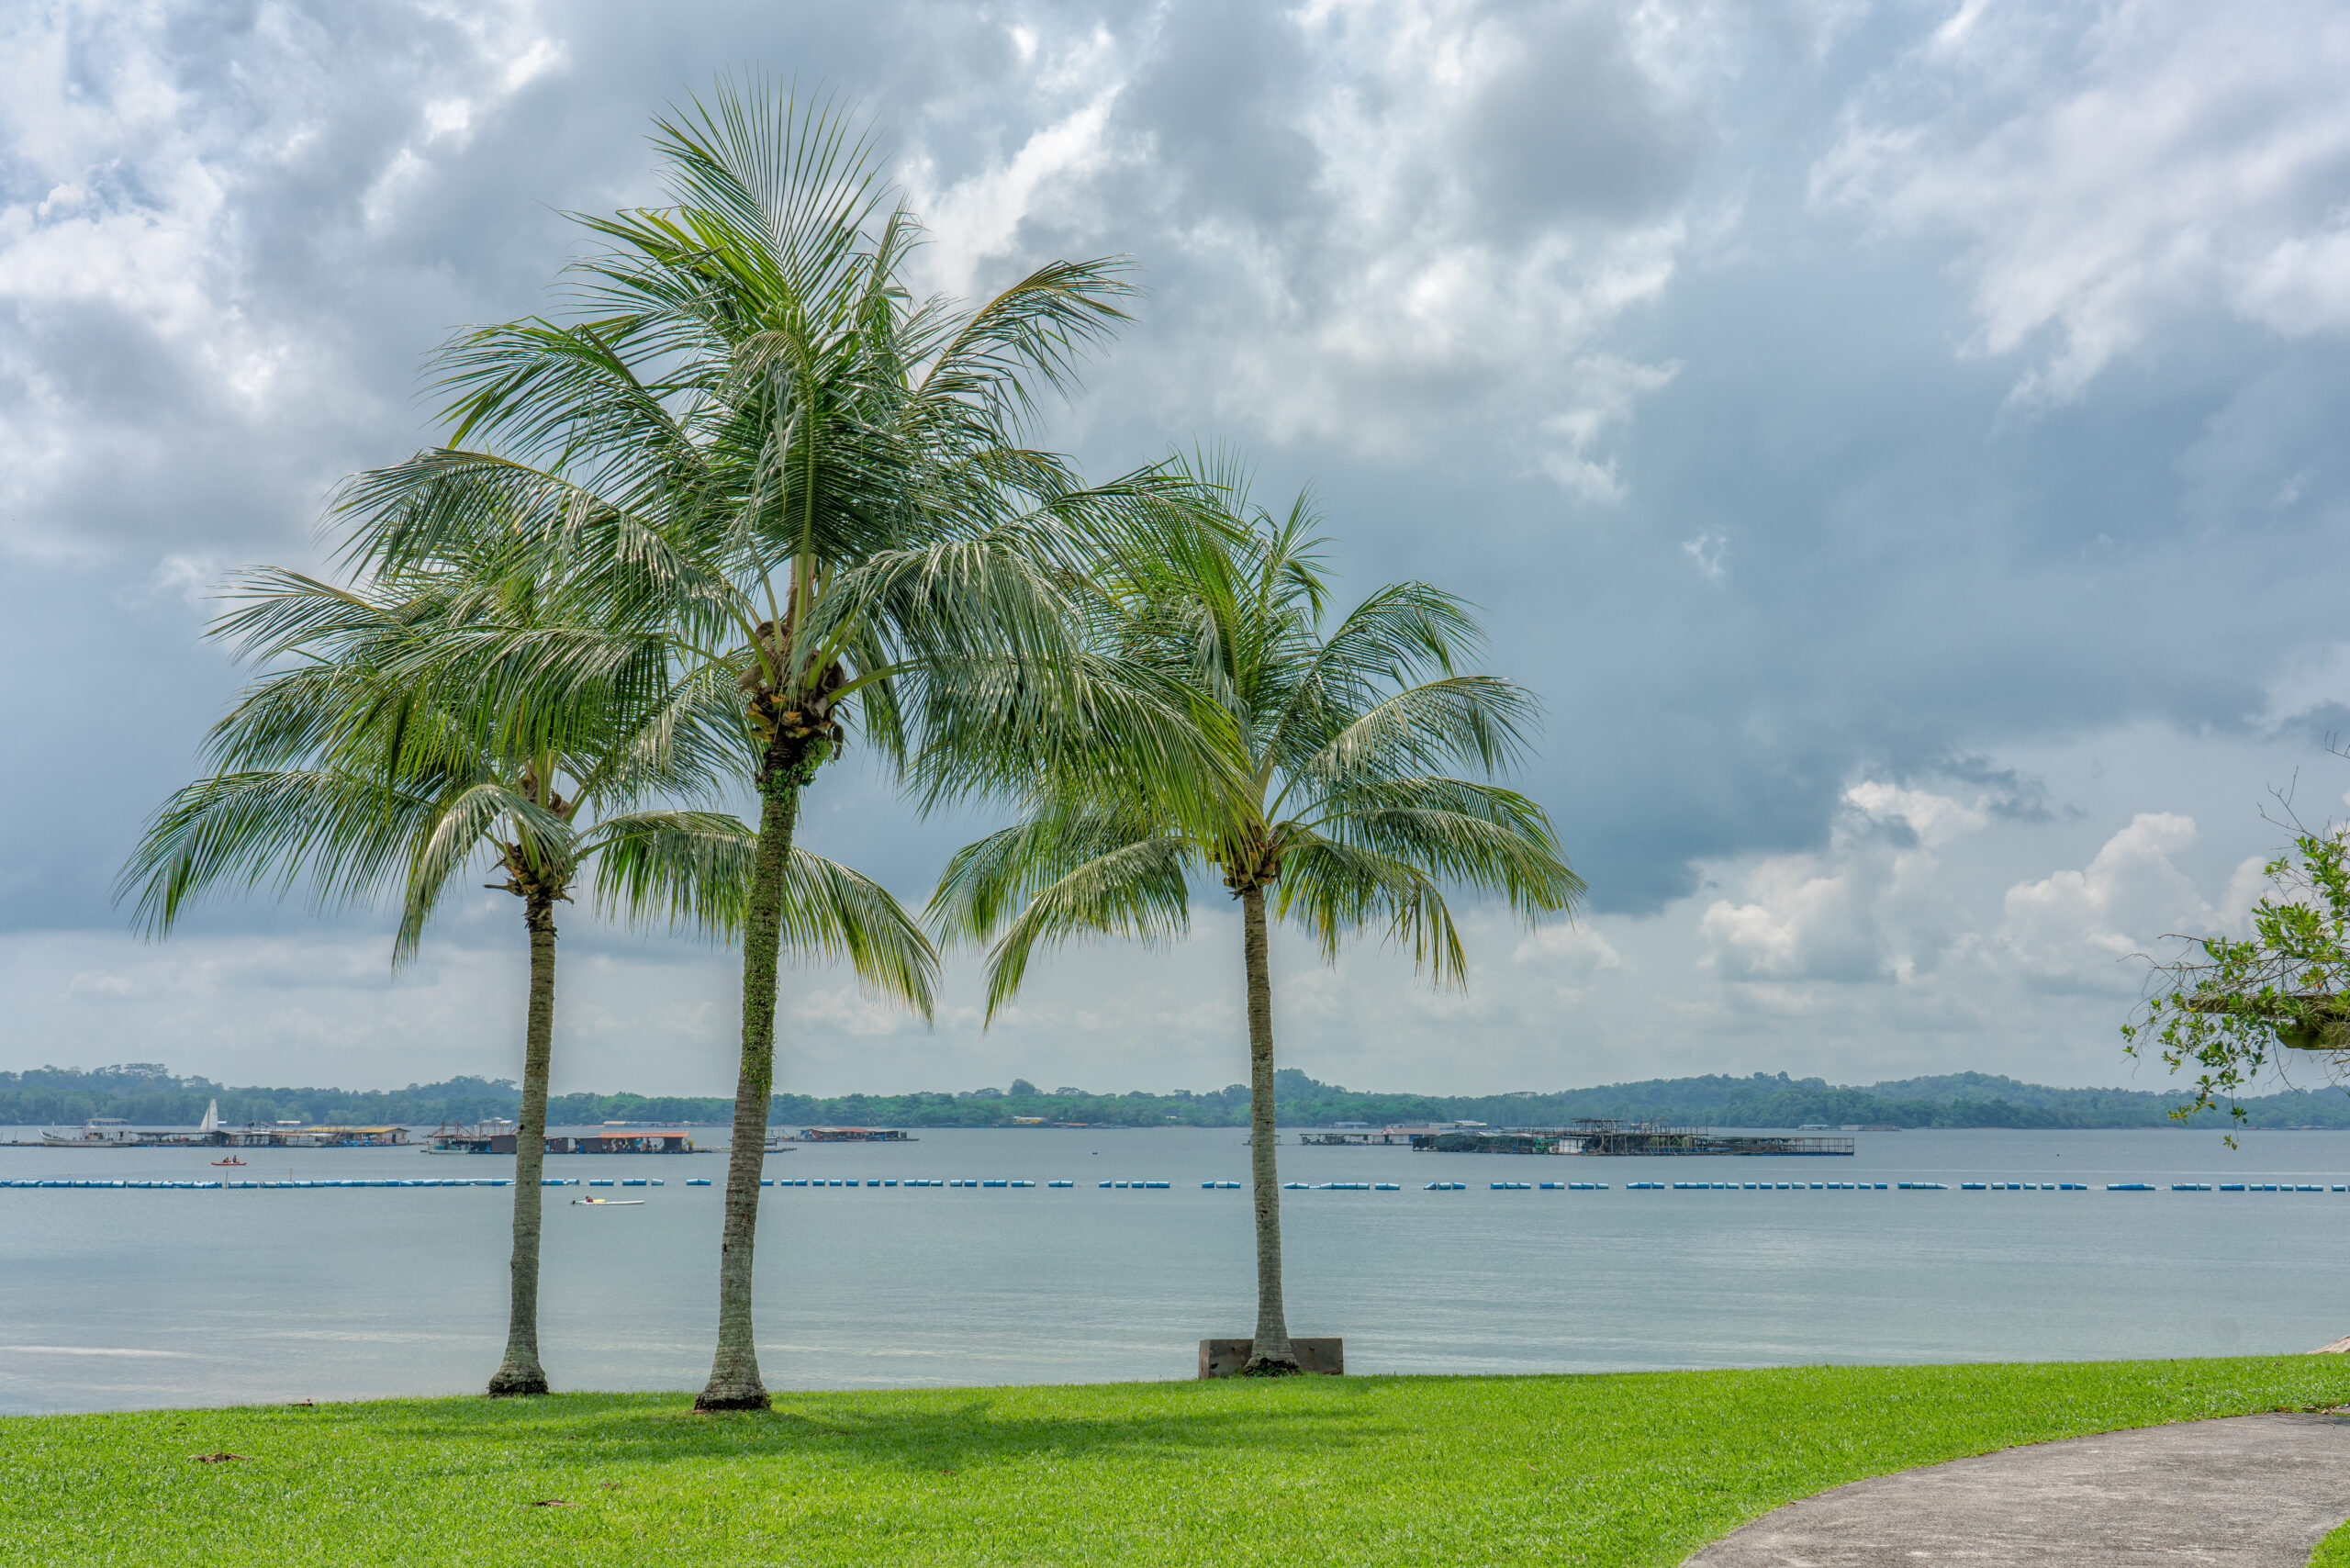 A scenic shot of palm trees and fish farms by the sea at Pasir Ris Park